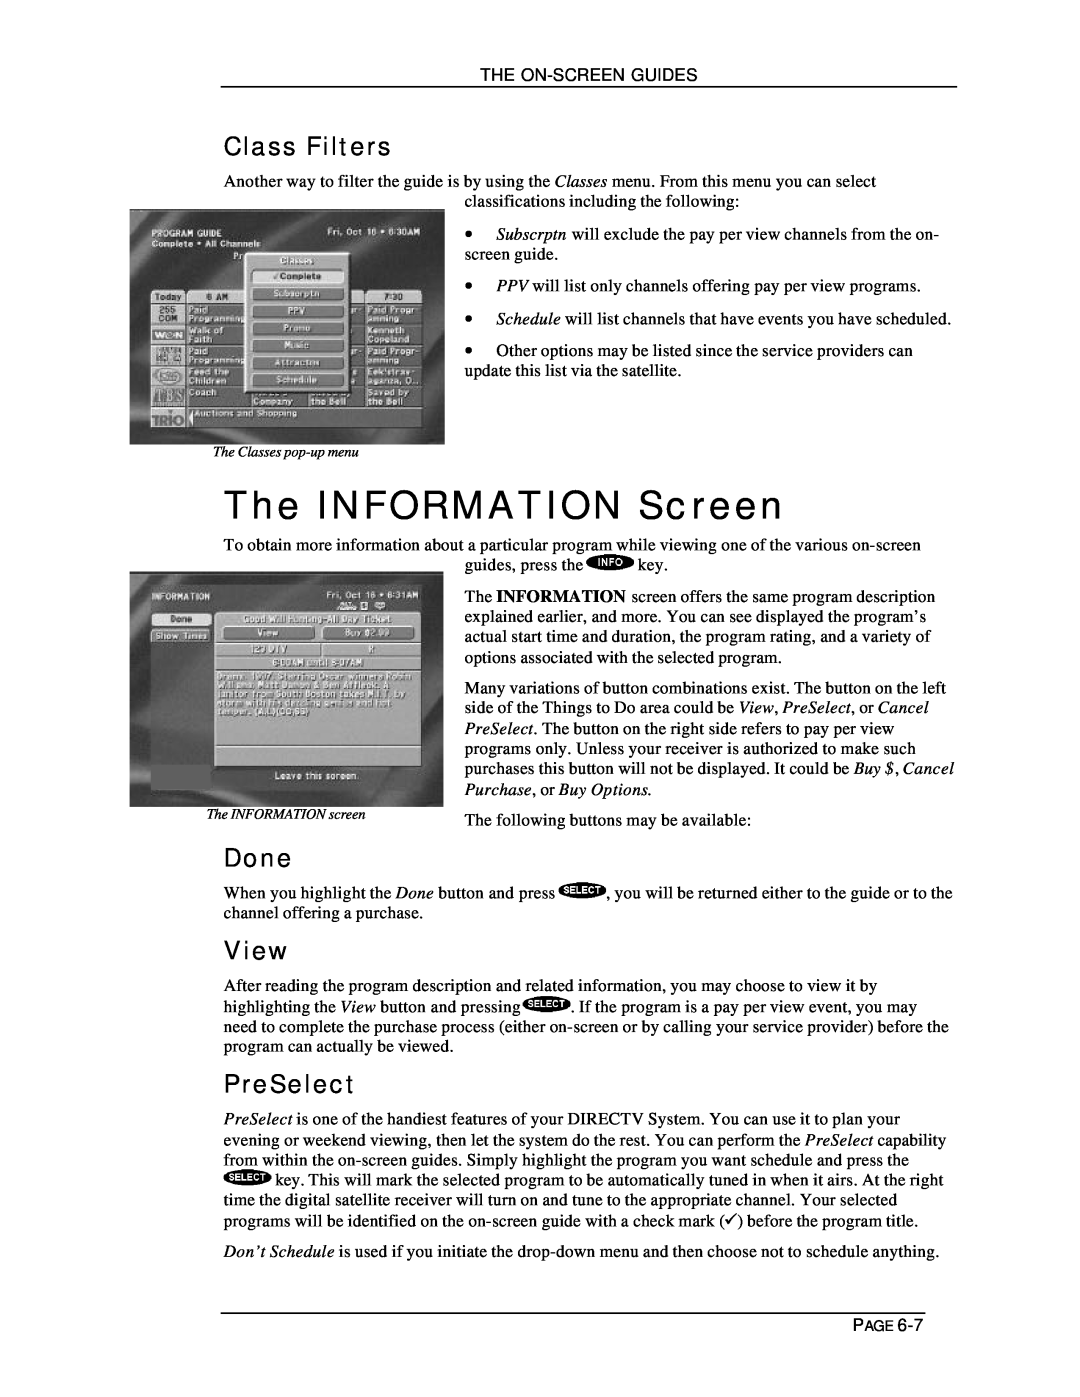 DirecTV HIRD-D11, HIRD-D01 owner manual The INFORMATION Screen, Class Filters, Done, View, PreSelect 